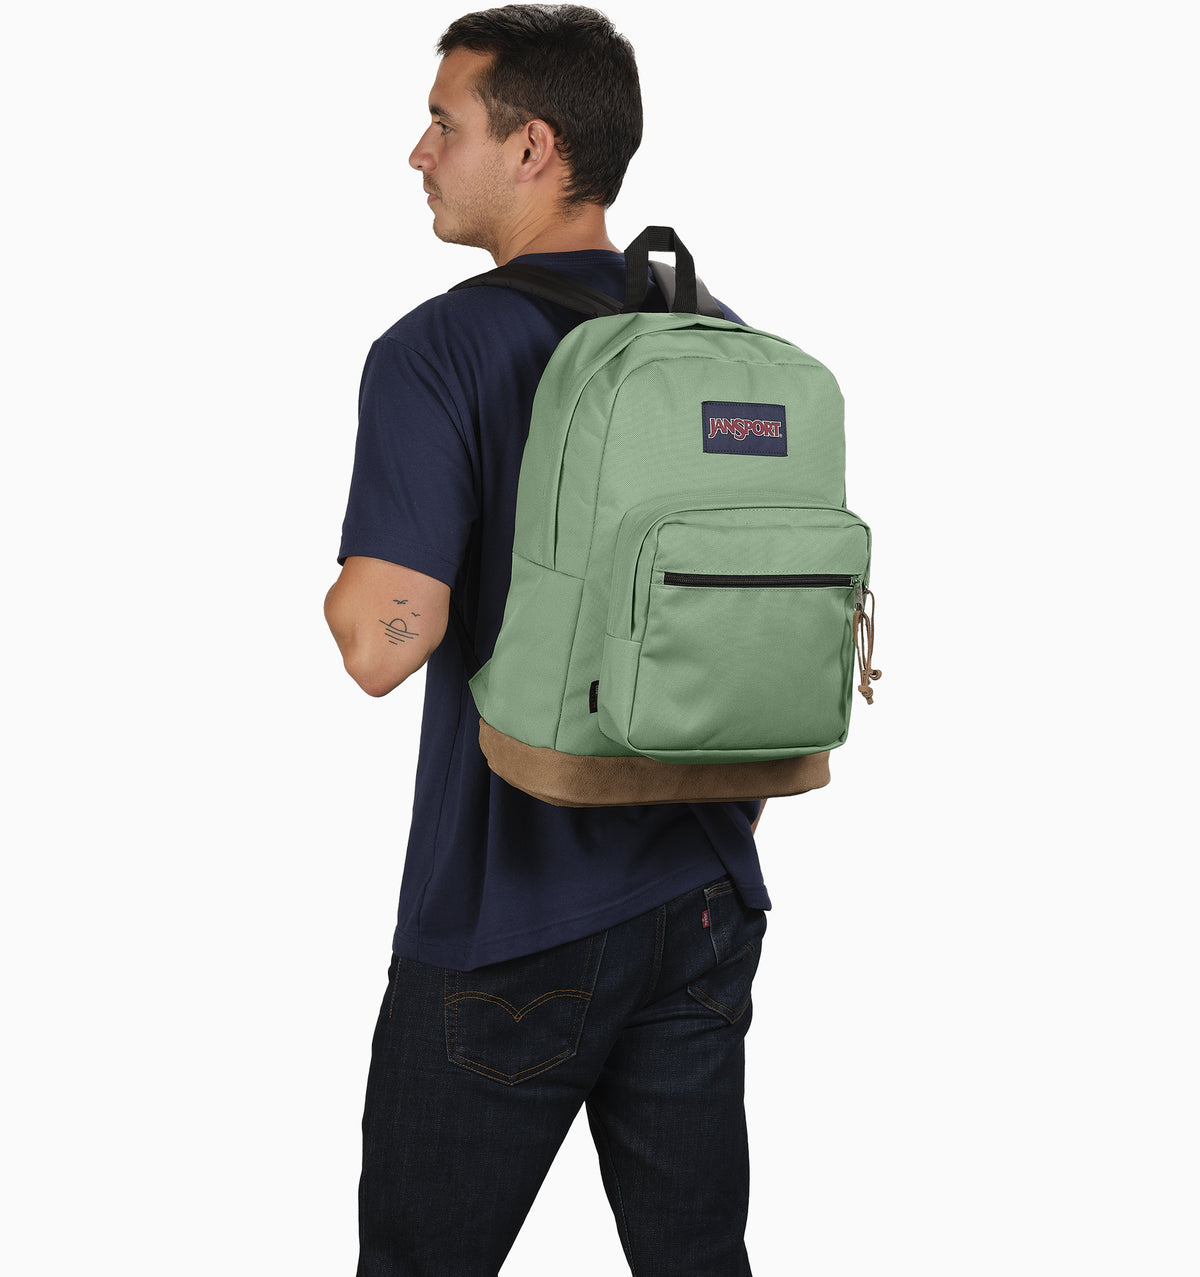 JanSport 16" Right Pack Laptop Backpack 31L - Loden Frost